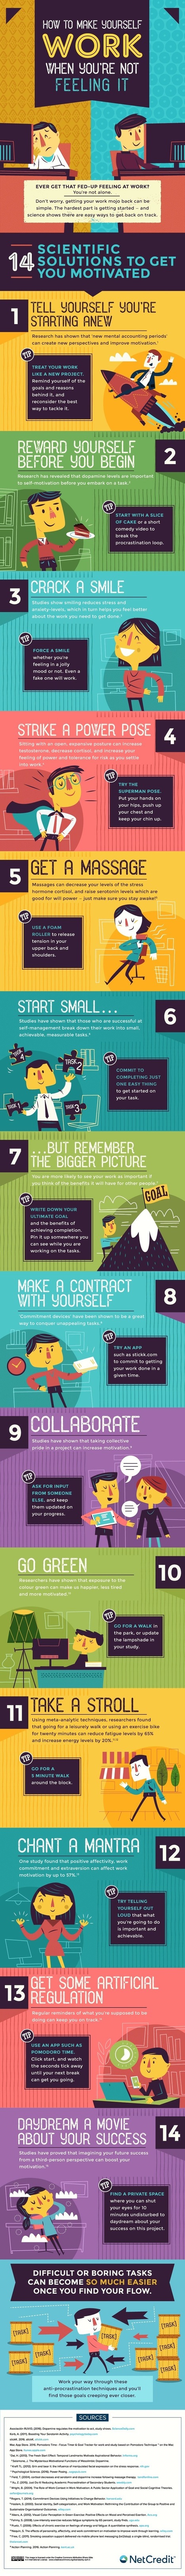 14 Ways To Get Into The Groove At Work  - Infographic | Education 2.0 & 3.0 | Scoop.it